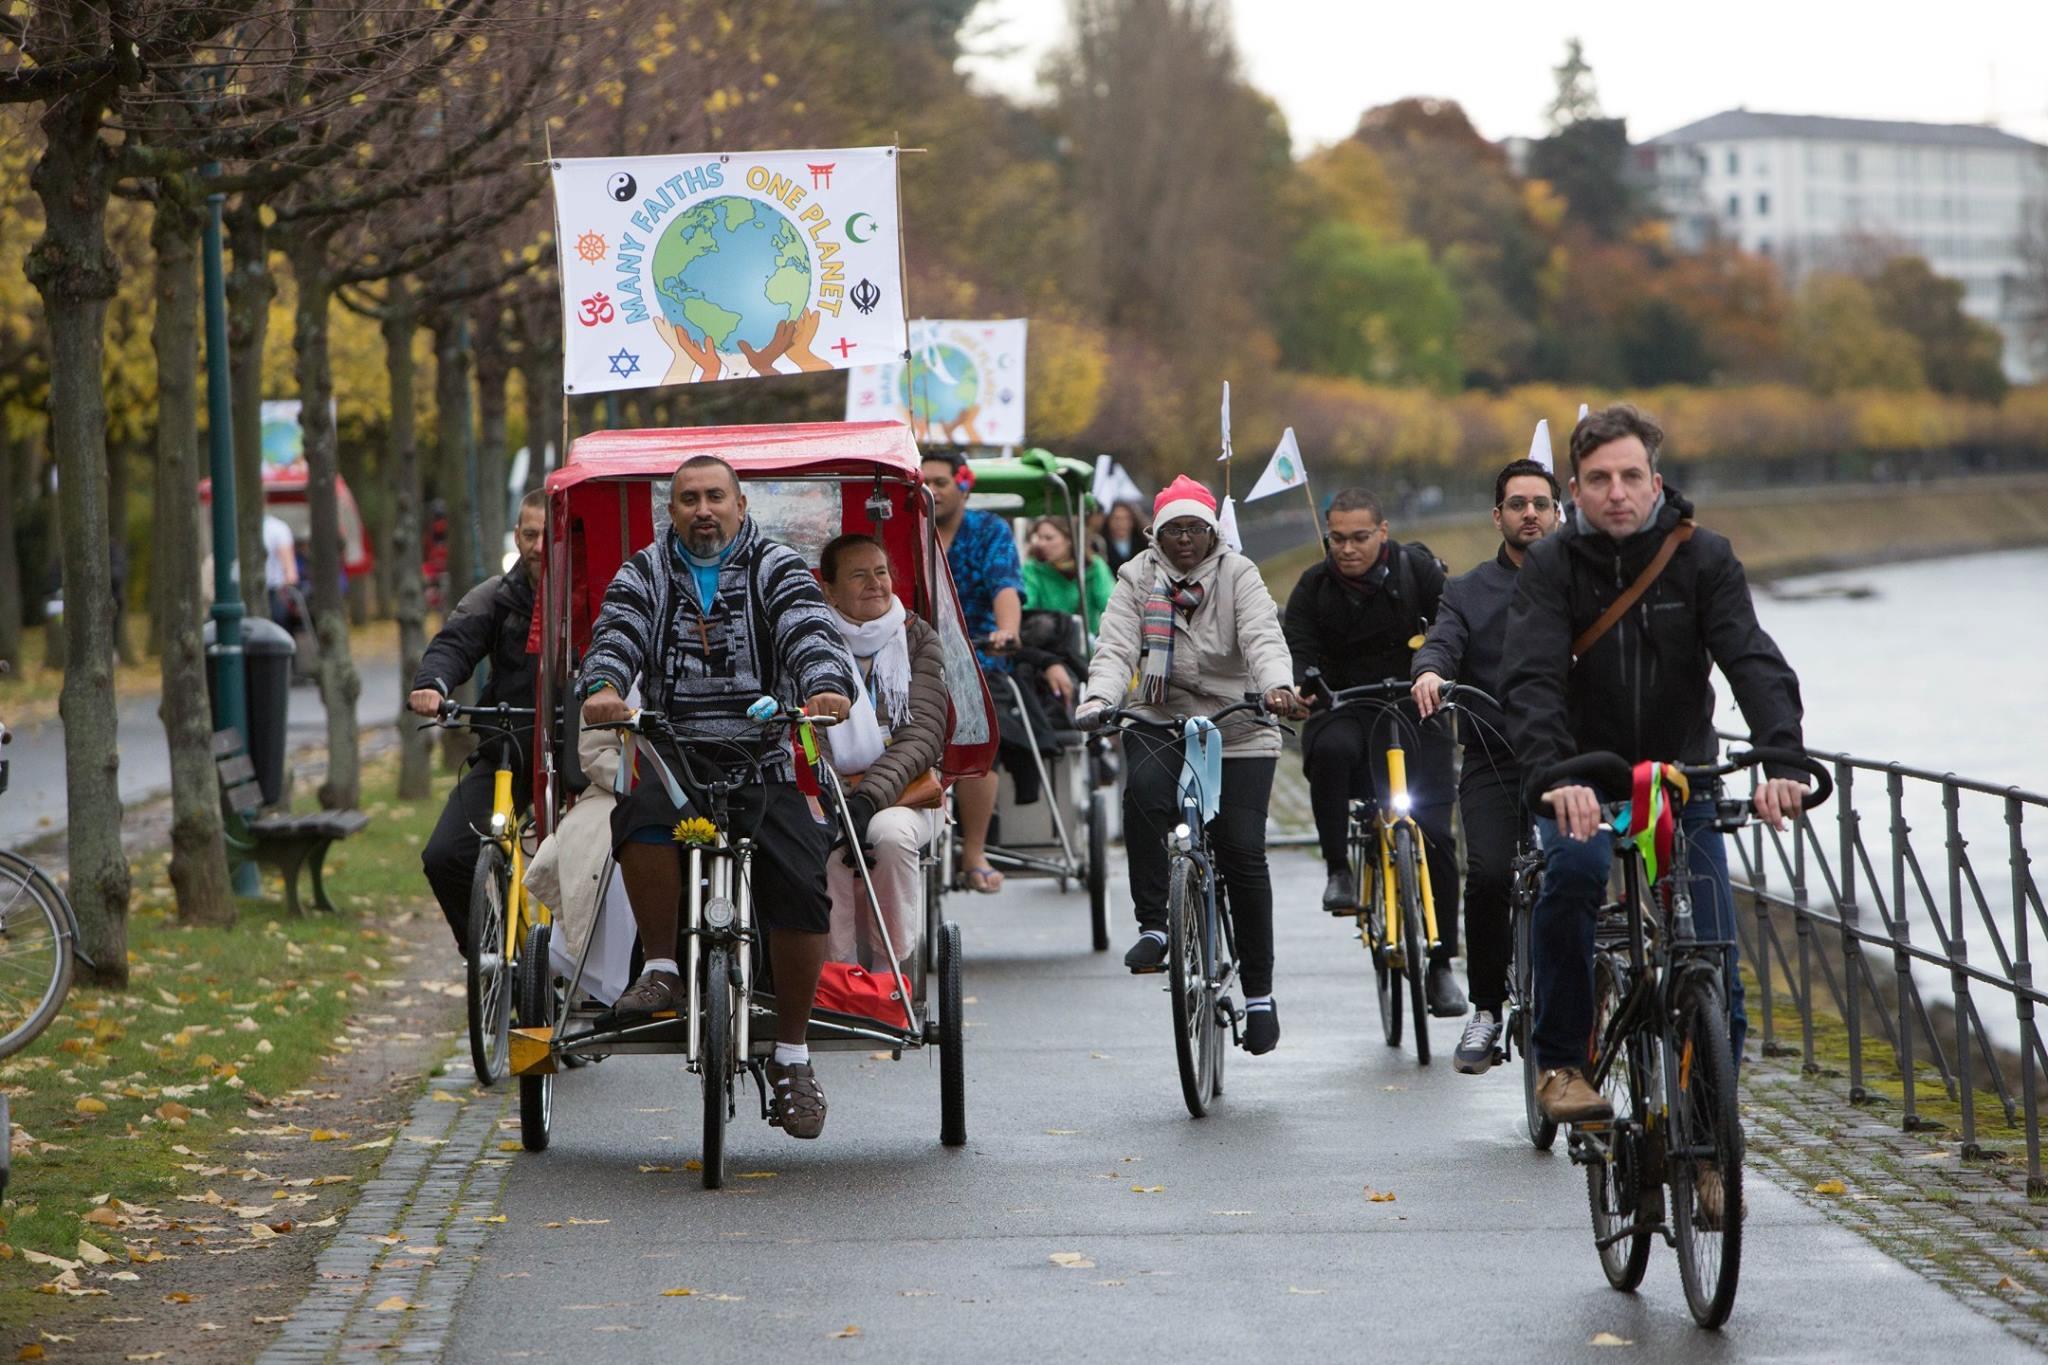 The statement was delivered by faith leaders on bicycles, promoting sustainable lifestyles. Photo: WCC/Sean Hawkey.